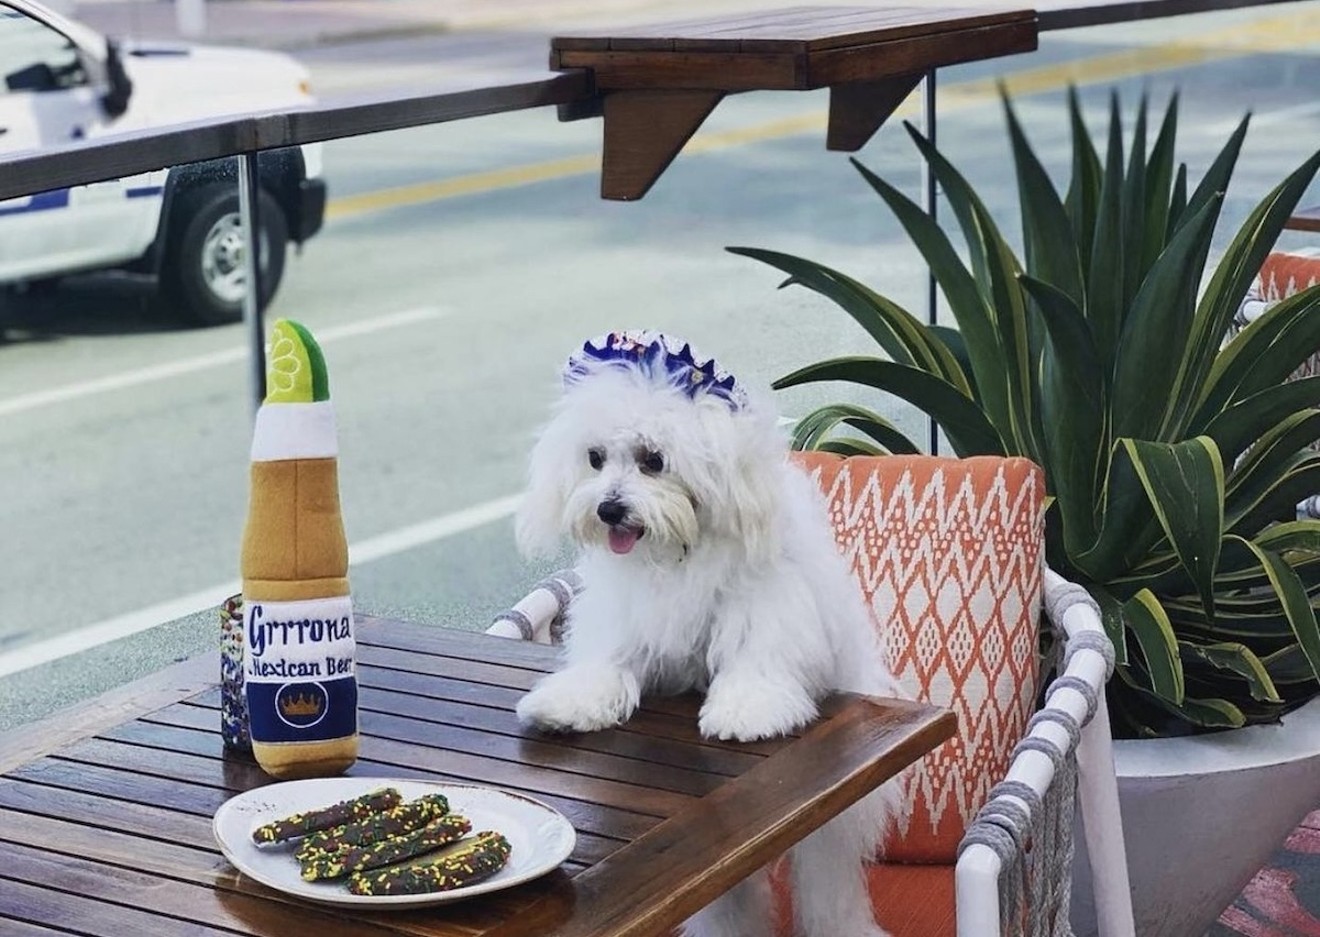 Bring your four-legged friends to this dog-friendly happy hour.